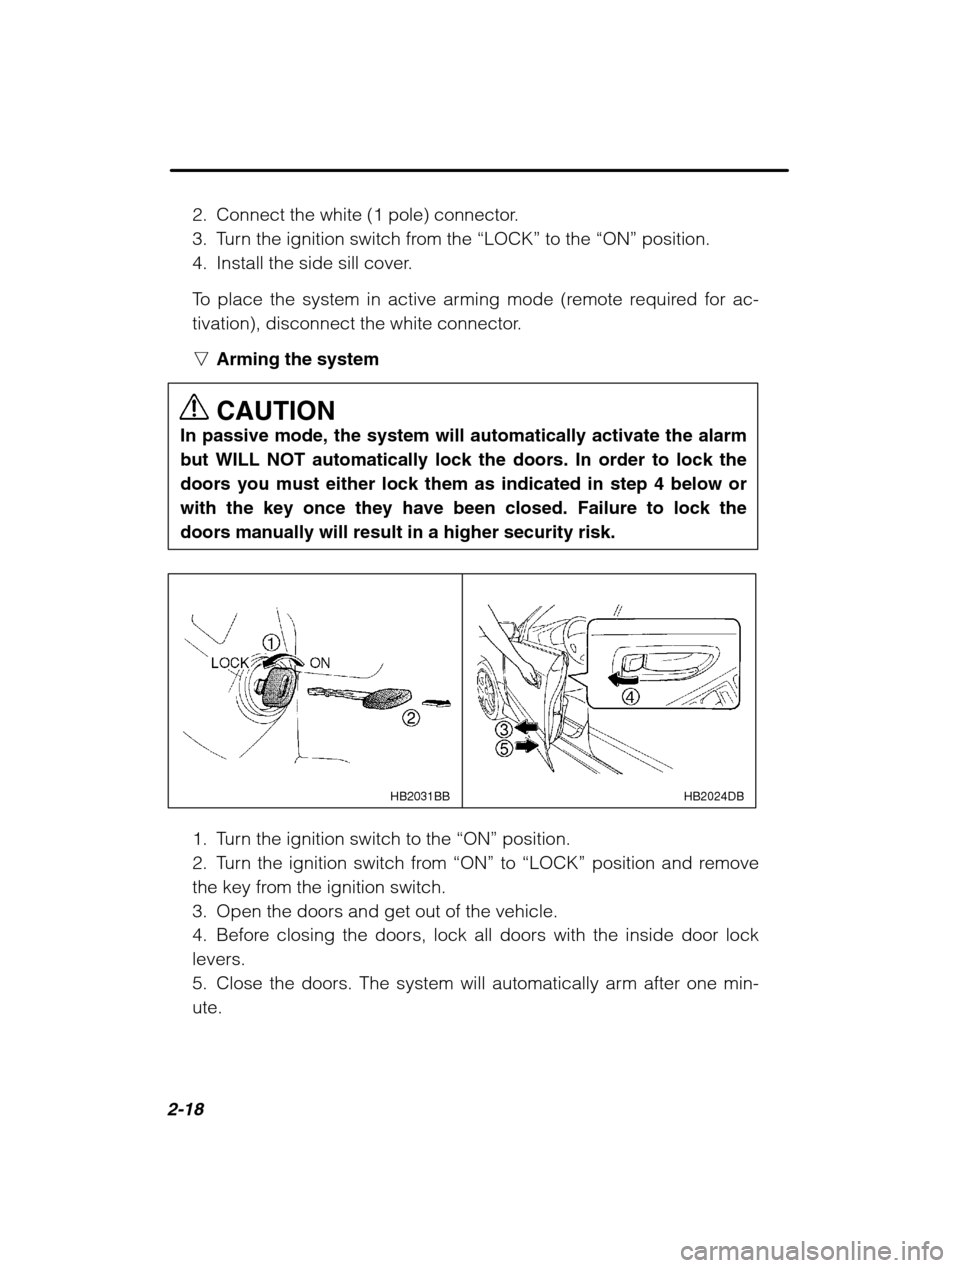 SUBARU LEGACY 2002 3.G Owners Manual 2-18
2. Connect the white (1 pole) connector. 
3. Turn the ignition switch from the “LOCK” to the “ON” position.
4. Install the side sill cover. 
To place the system in active arming mode (rem